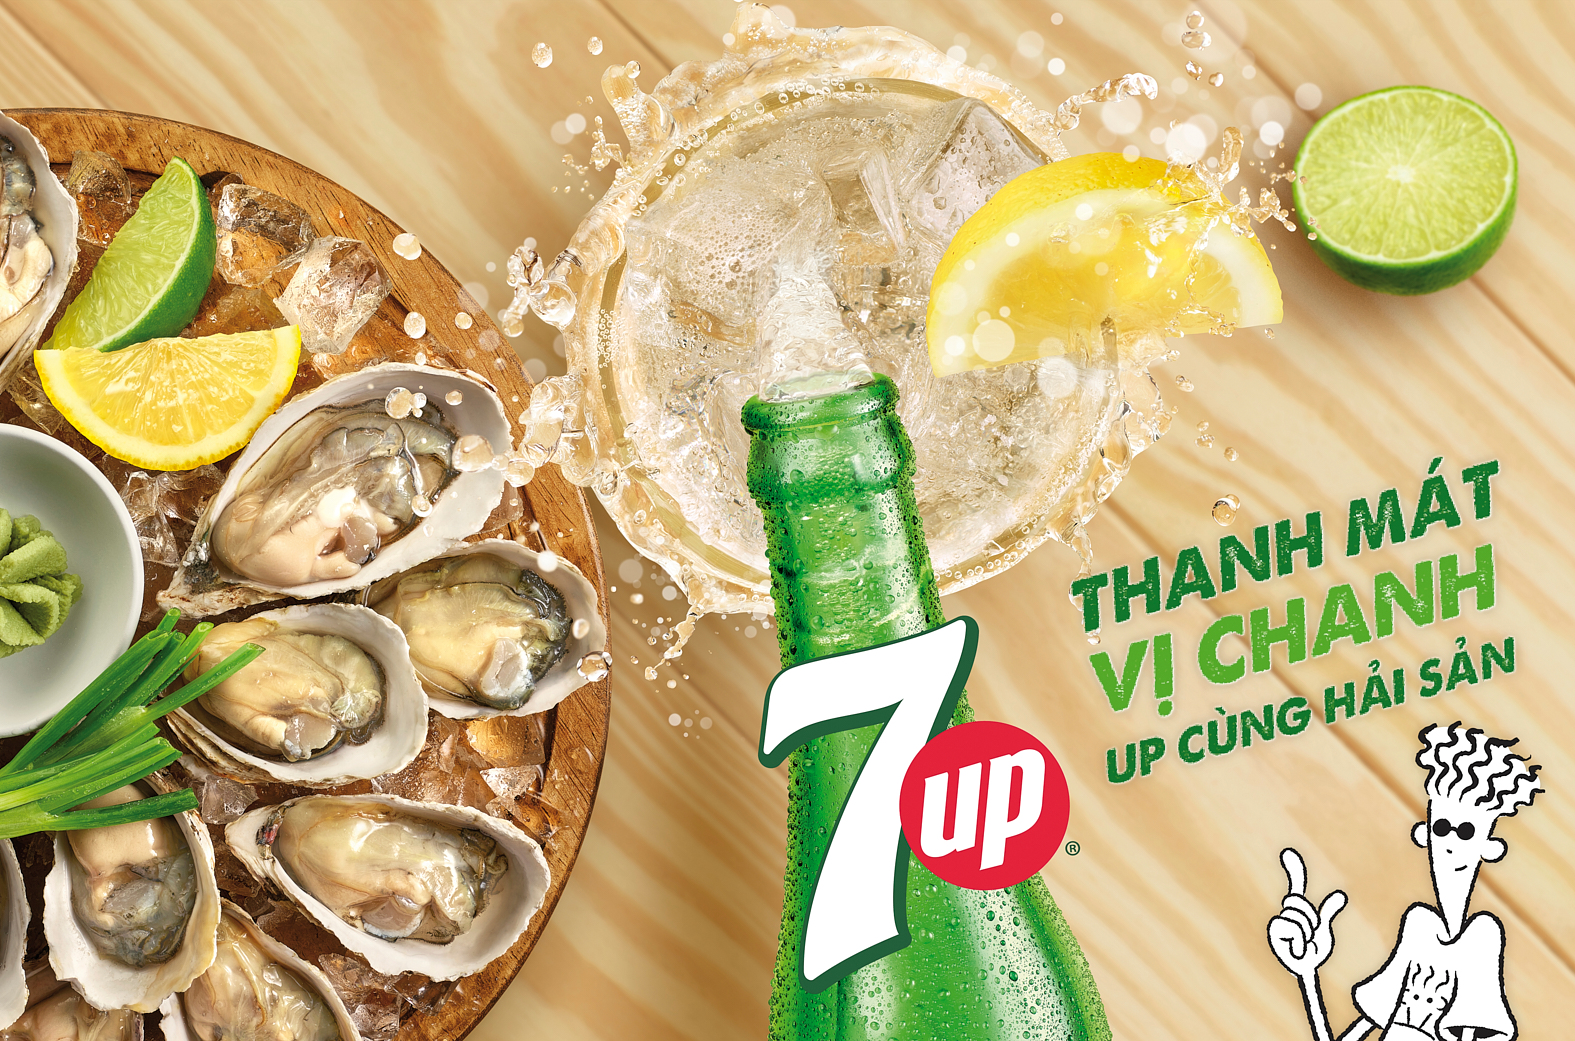 7UP_OYSTERKVFinal